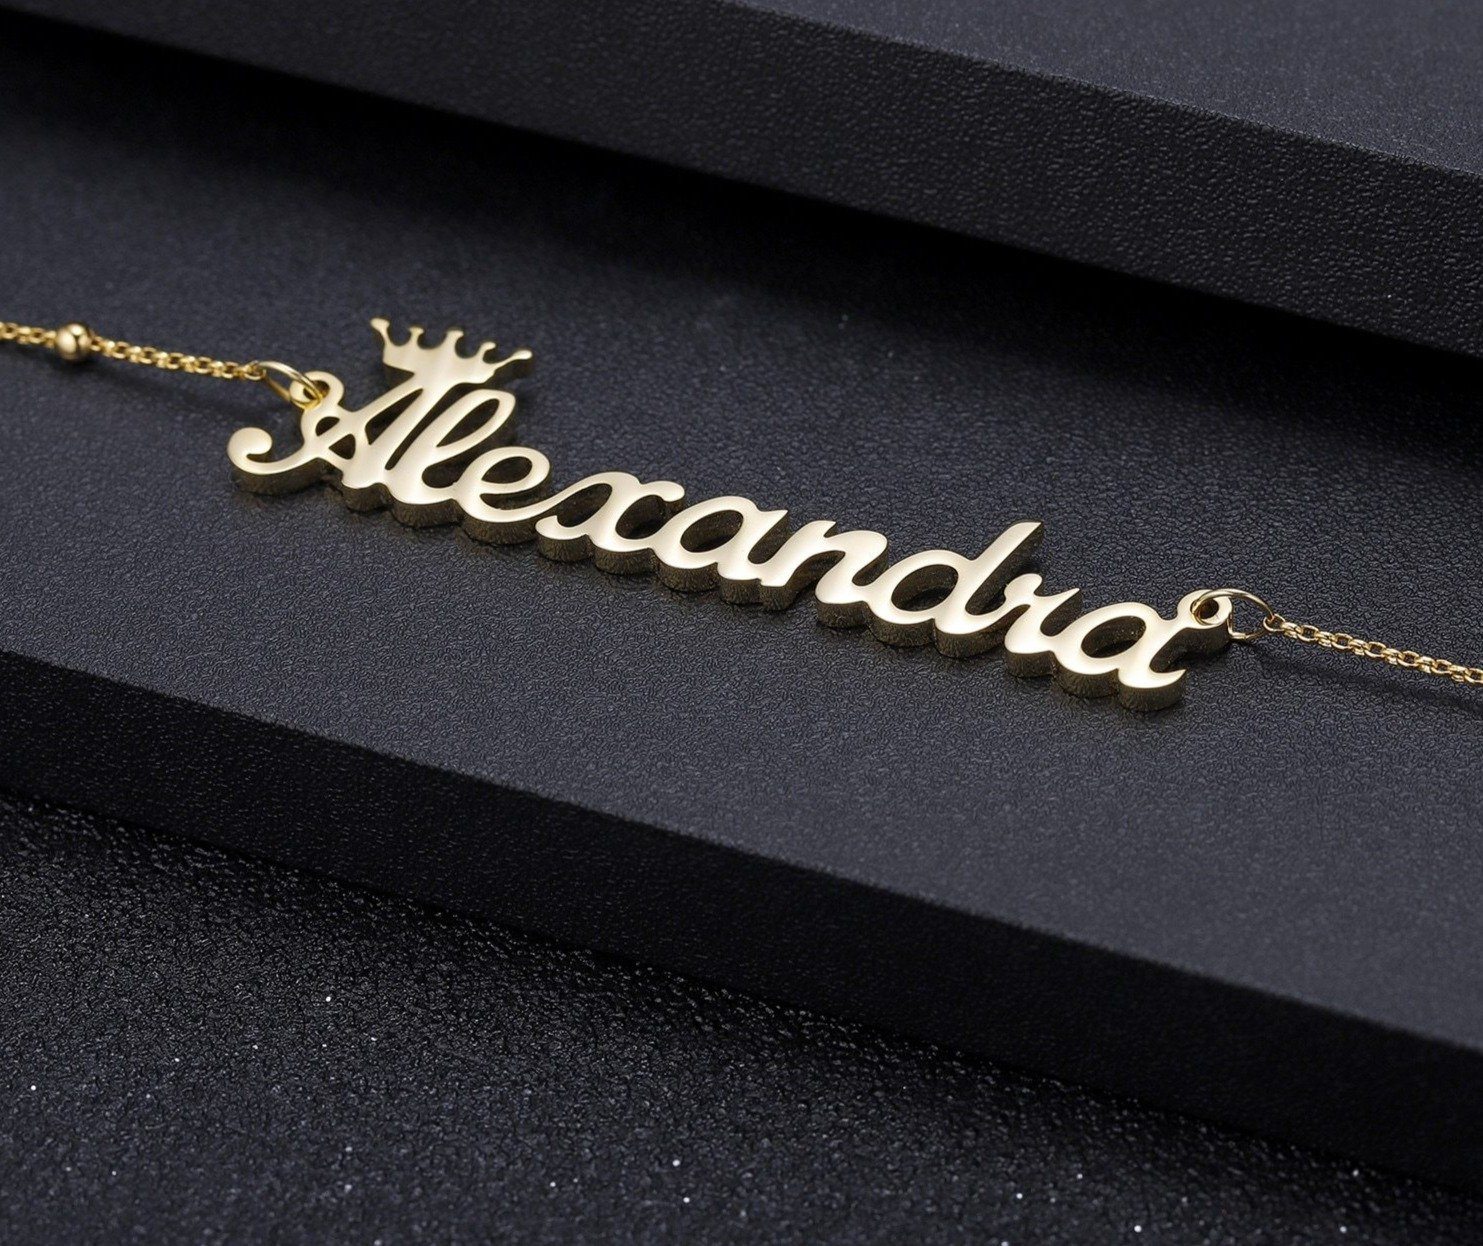 Personalized Cursive Font Name Necklace With Crown (3 colors)